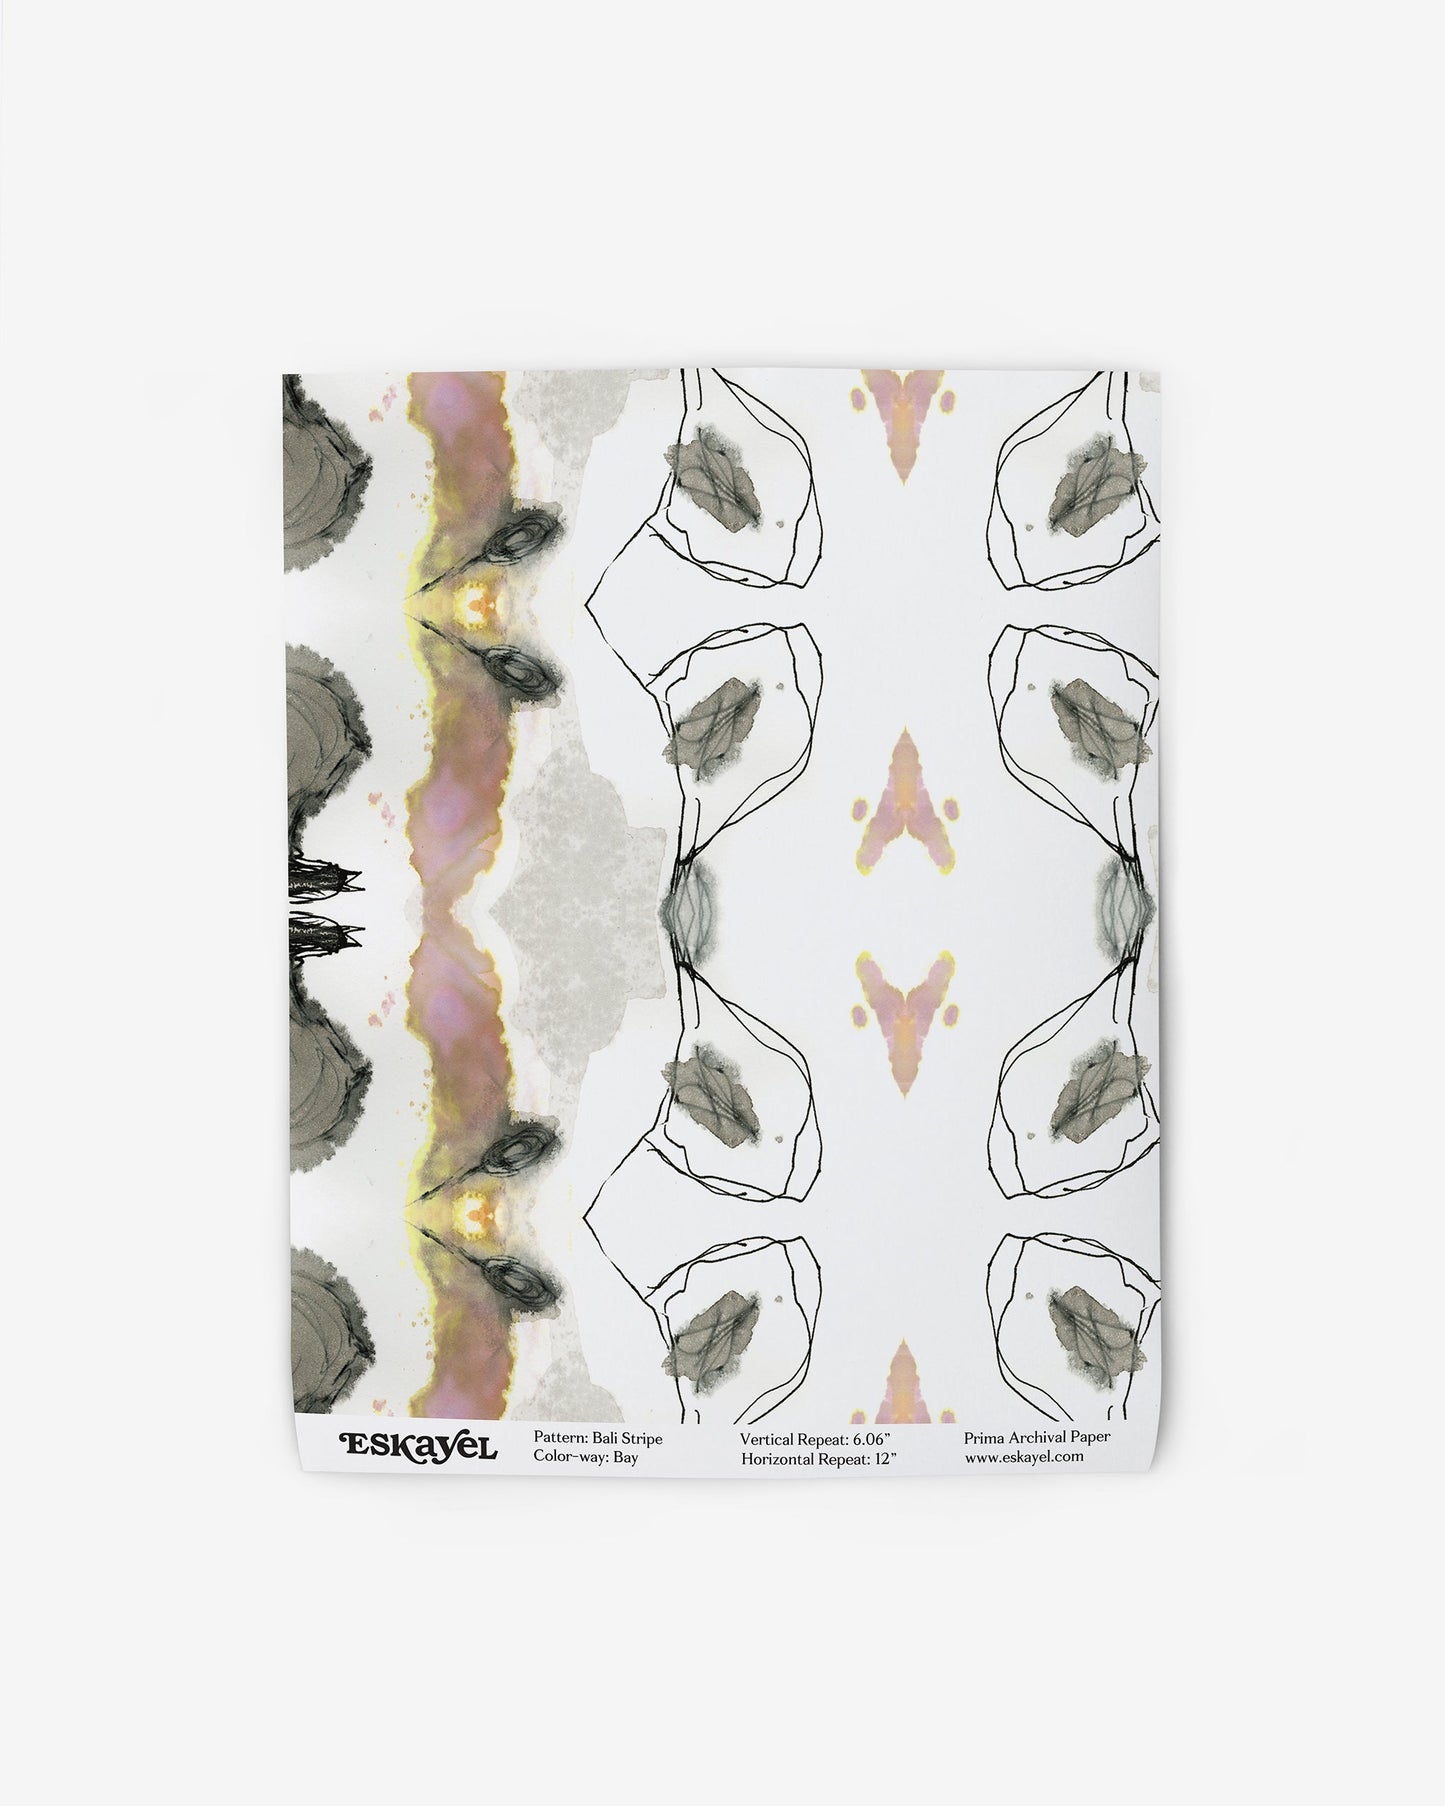 A Bali Stripe Wallpaper Sample with an abstract design on it